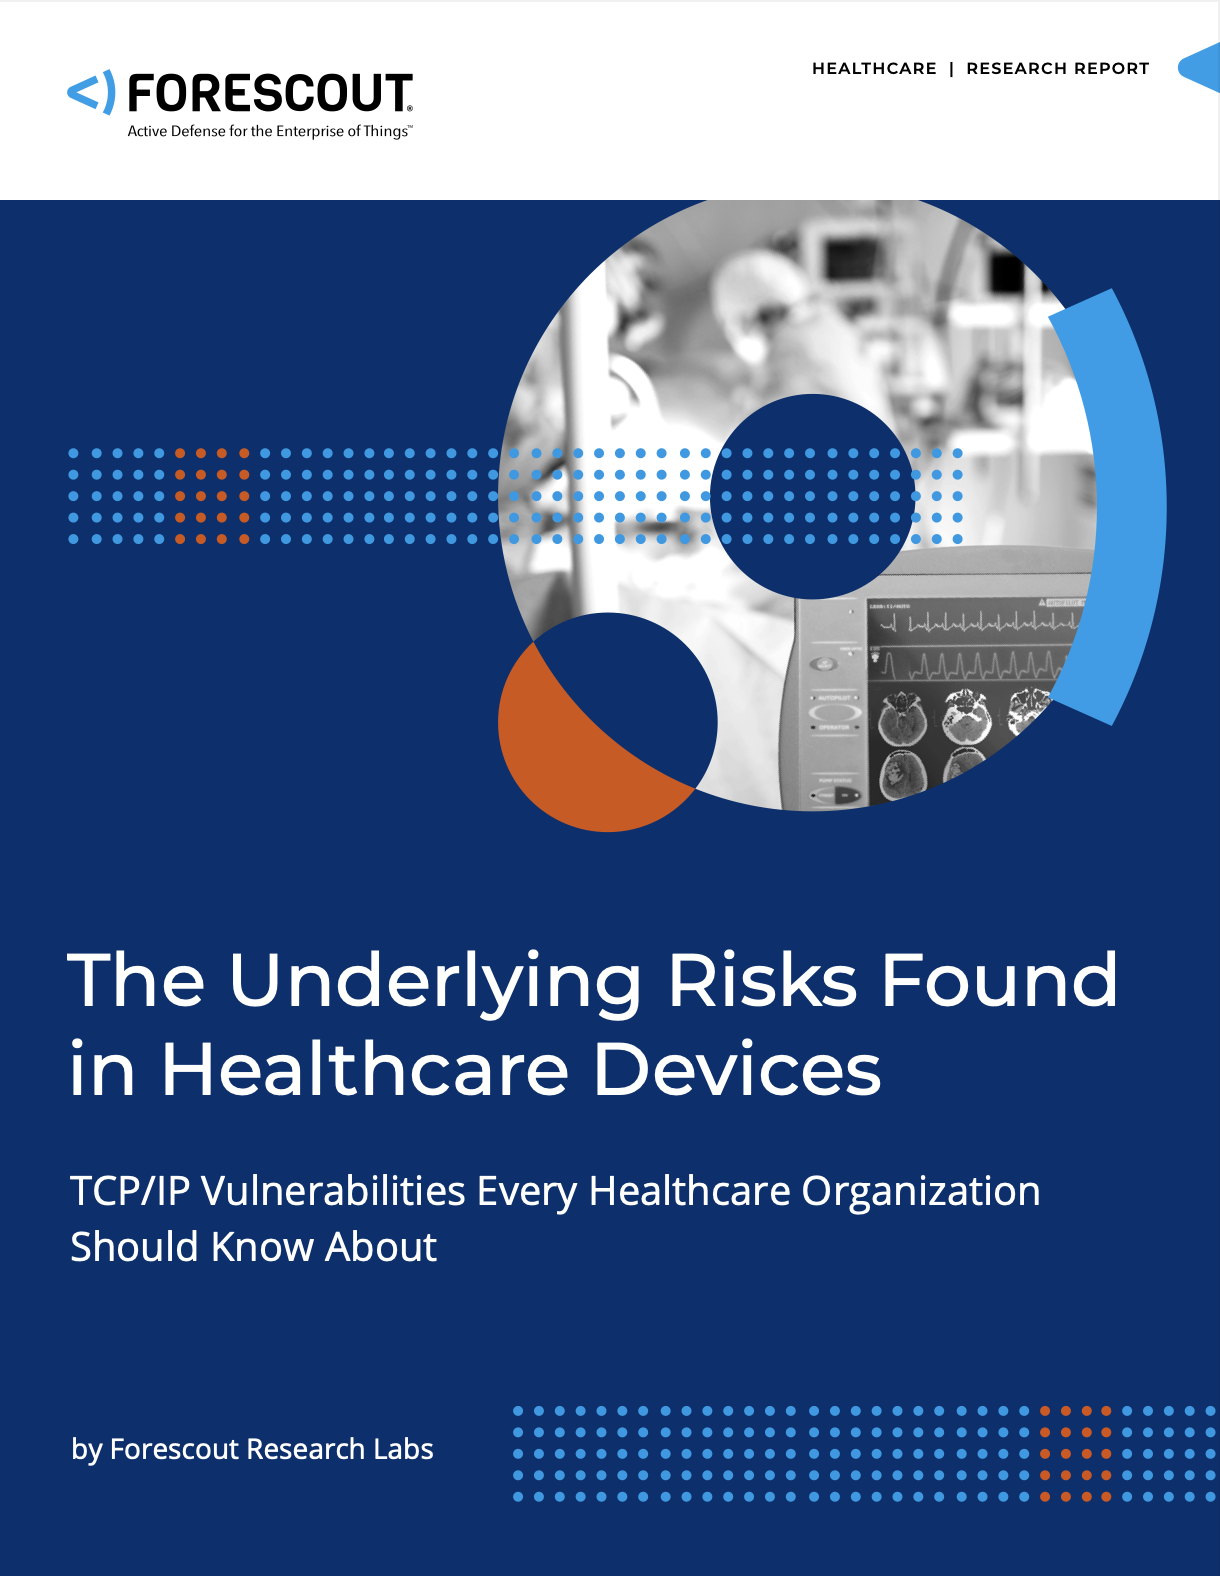 The Underlying Risks Found in Healthcare Devices